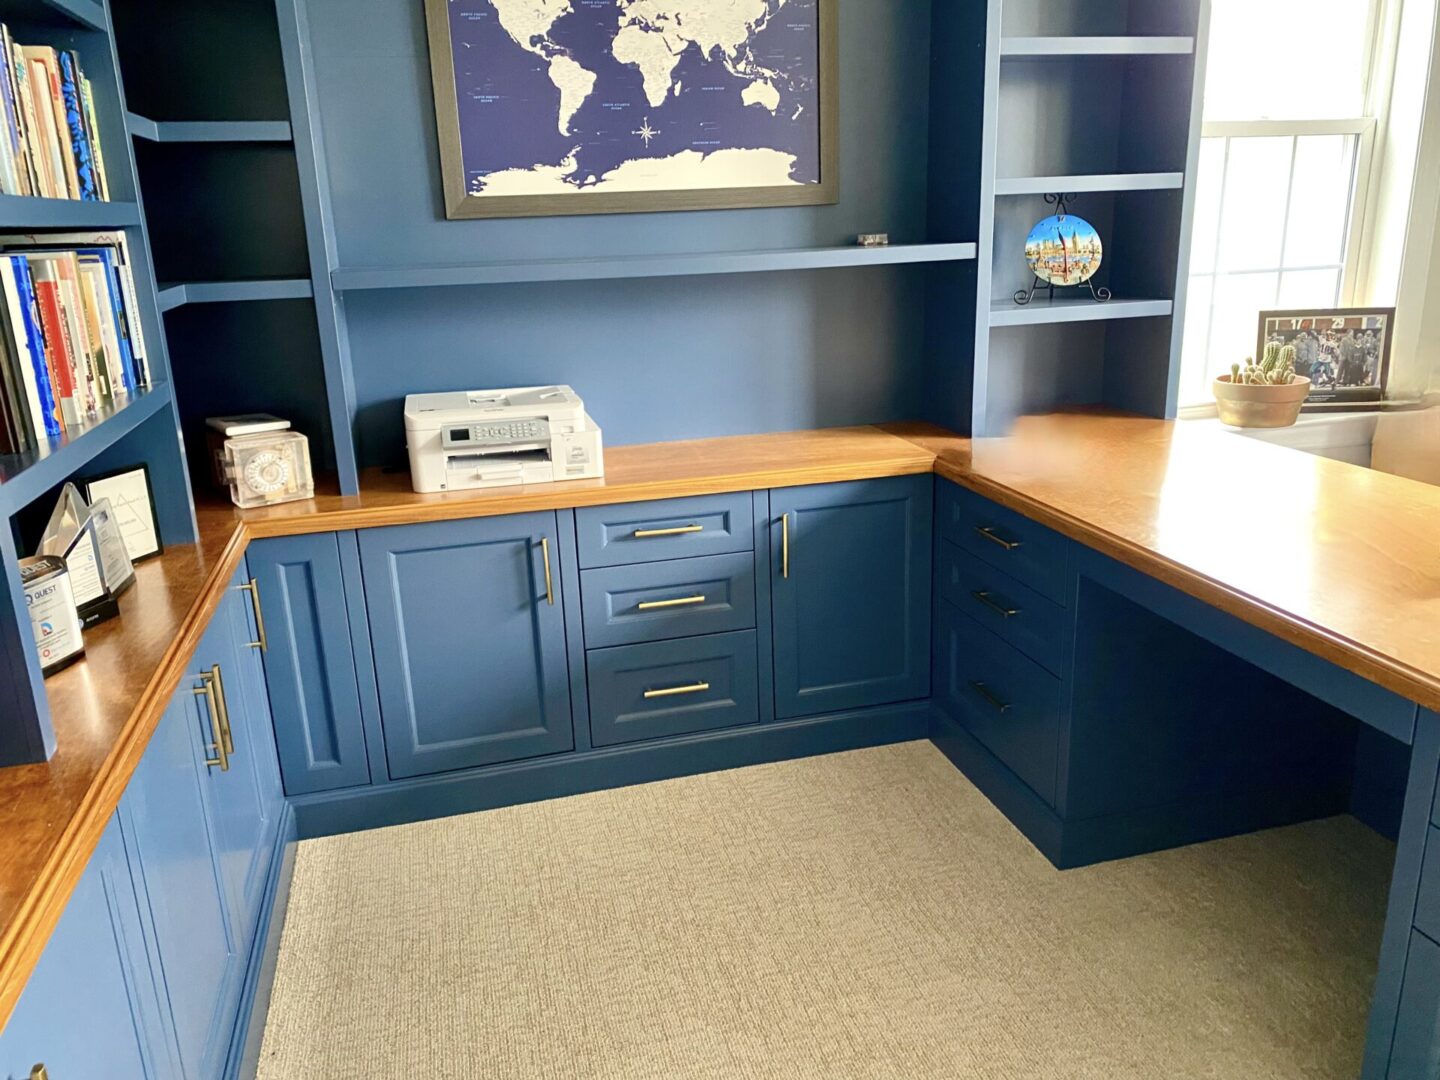 A room with blue cabinets and a world map on the wall